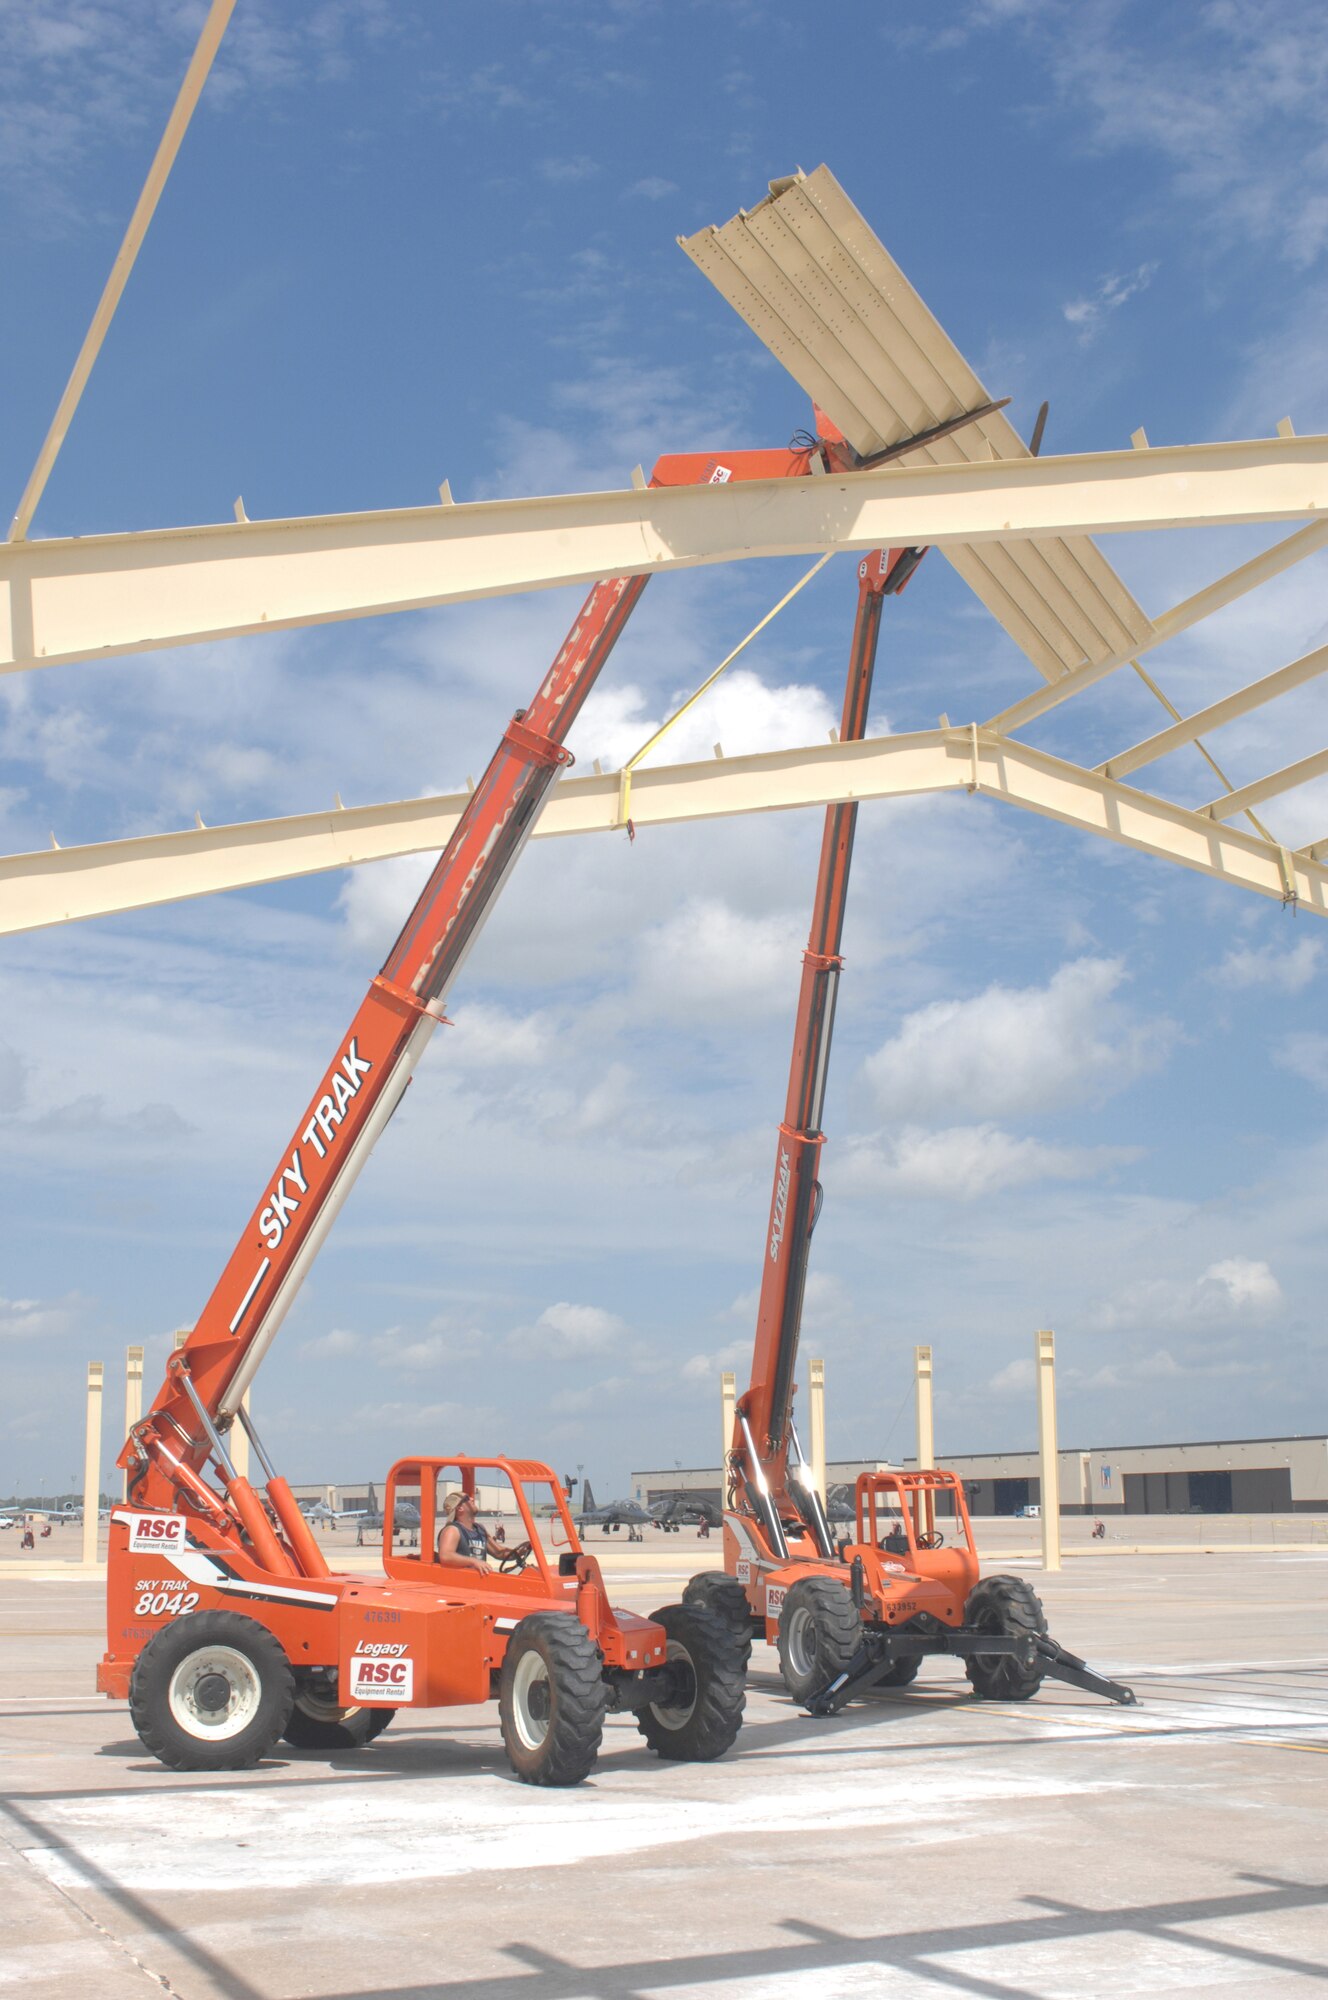 WHITEMAN AIR FORCE BASE, Mo., -- John Baggett, EDL Contracting Company, lifts the purlins onto the frame with a telescoping forklift. Shelters are being constructed for the 442nd Fighter Wing's A-10s between the A-10 maintenance hangers and the 509th Bomb Wing B-2 docks. Due to the 2005 realignment, whiteman had an increase of aircraft it did not have enough hanger space for. The shelters will be used for maintenance on the A-10’s during increment weather. (U.S. Air Force Photo/Tech Sgt. Samuel Park)